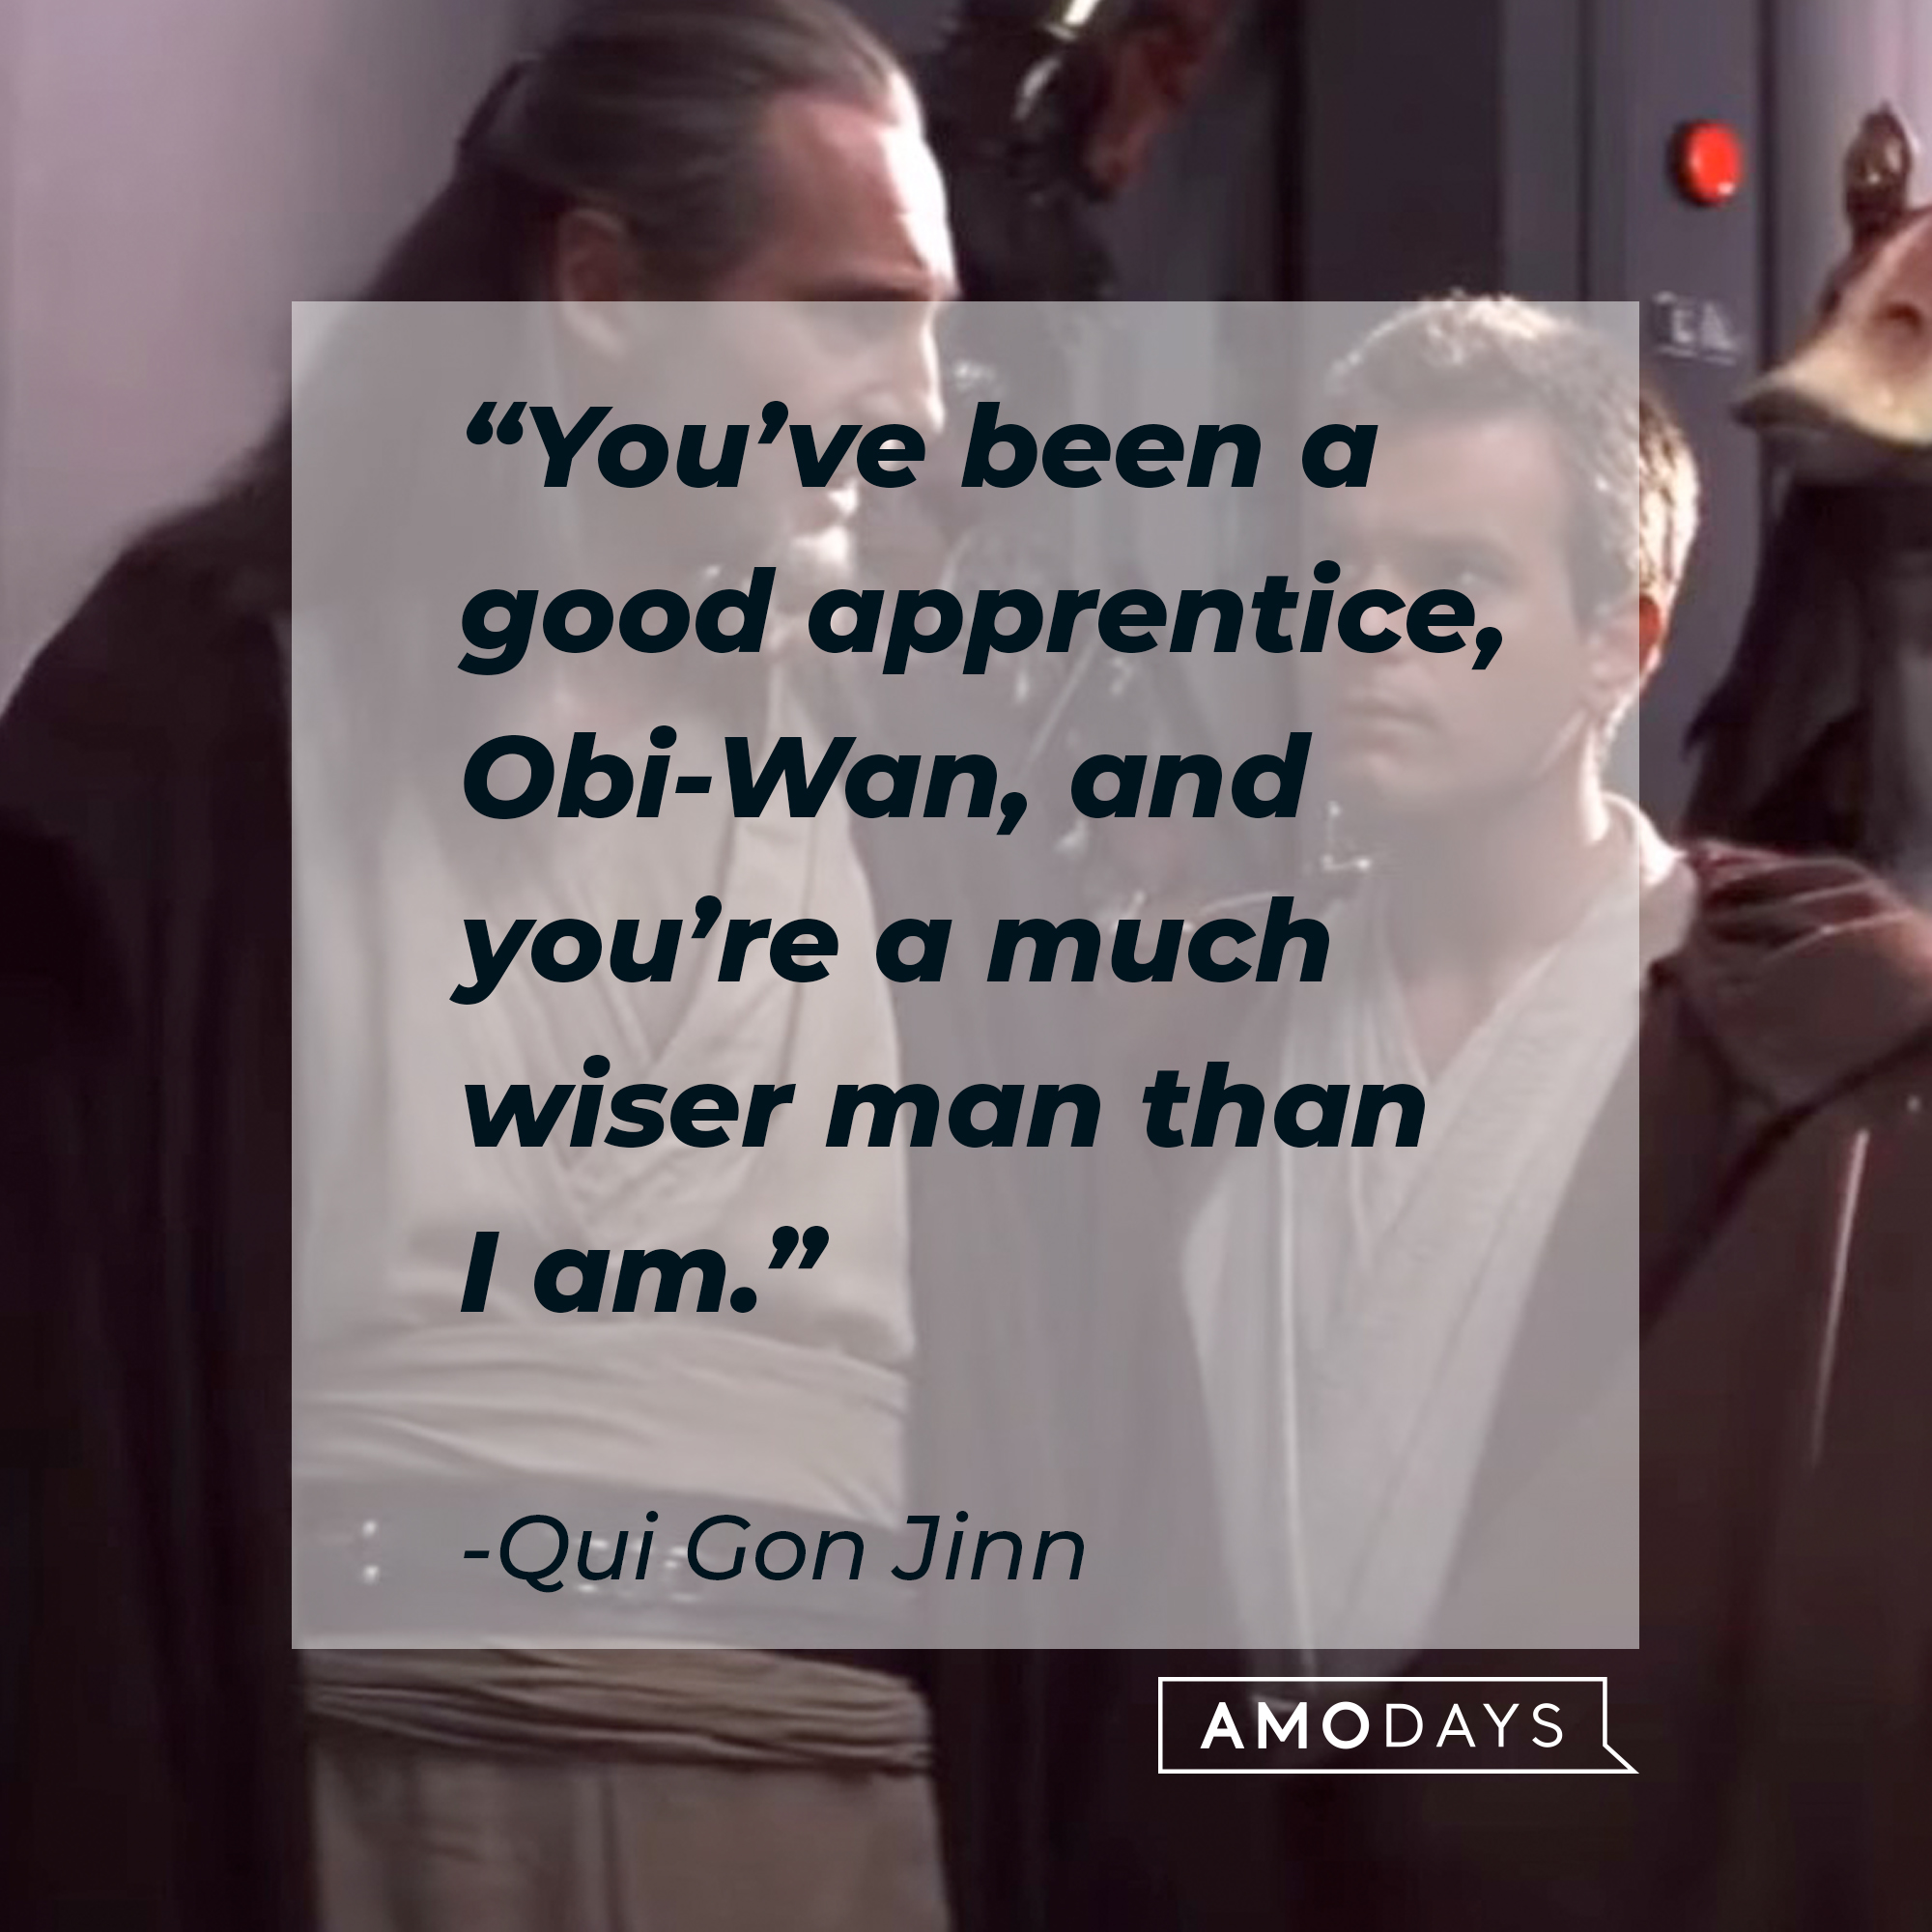 A picture of Qui Gon Jinn with a quote by him: “You’ve been a good apprentice, Obi-Wan, and you’re a much wiser man than I am.” | Source: facebook.com/StarWars